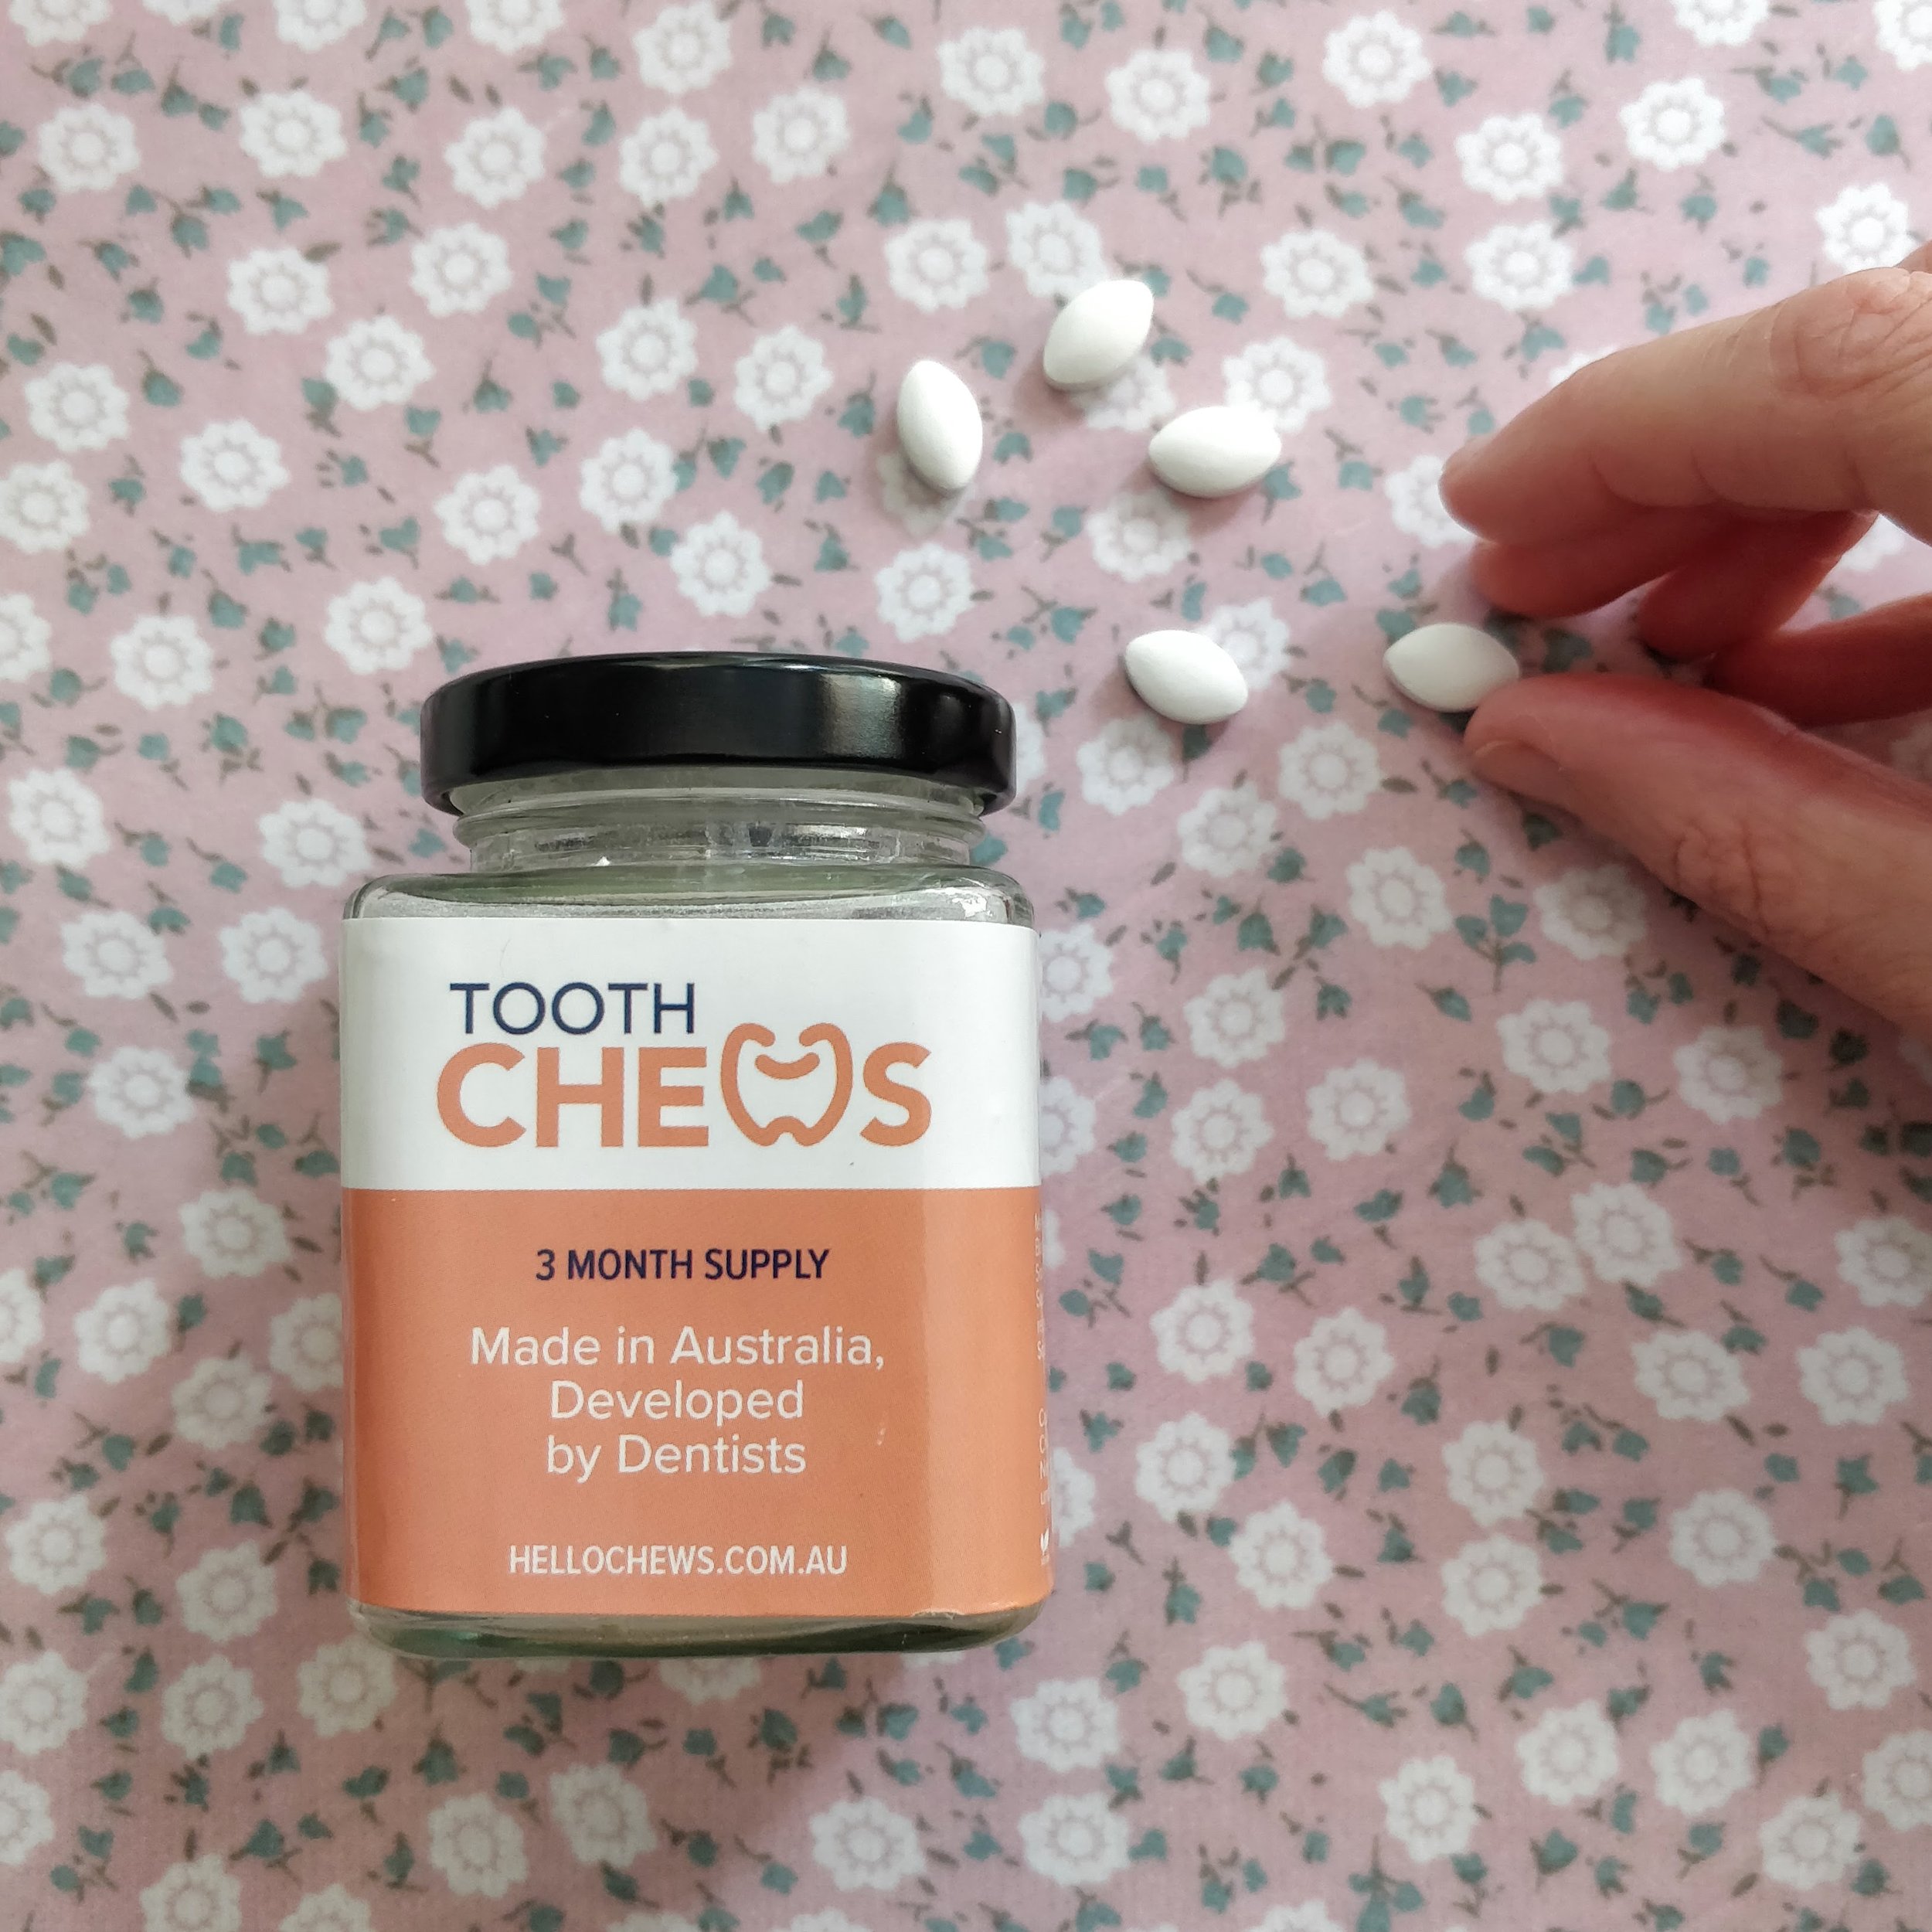 20. ToothChews tooth tabs